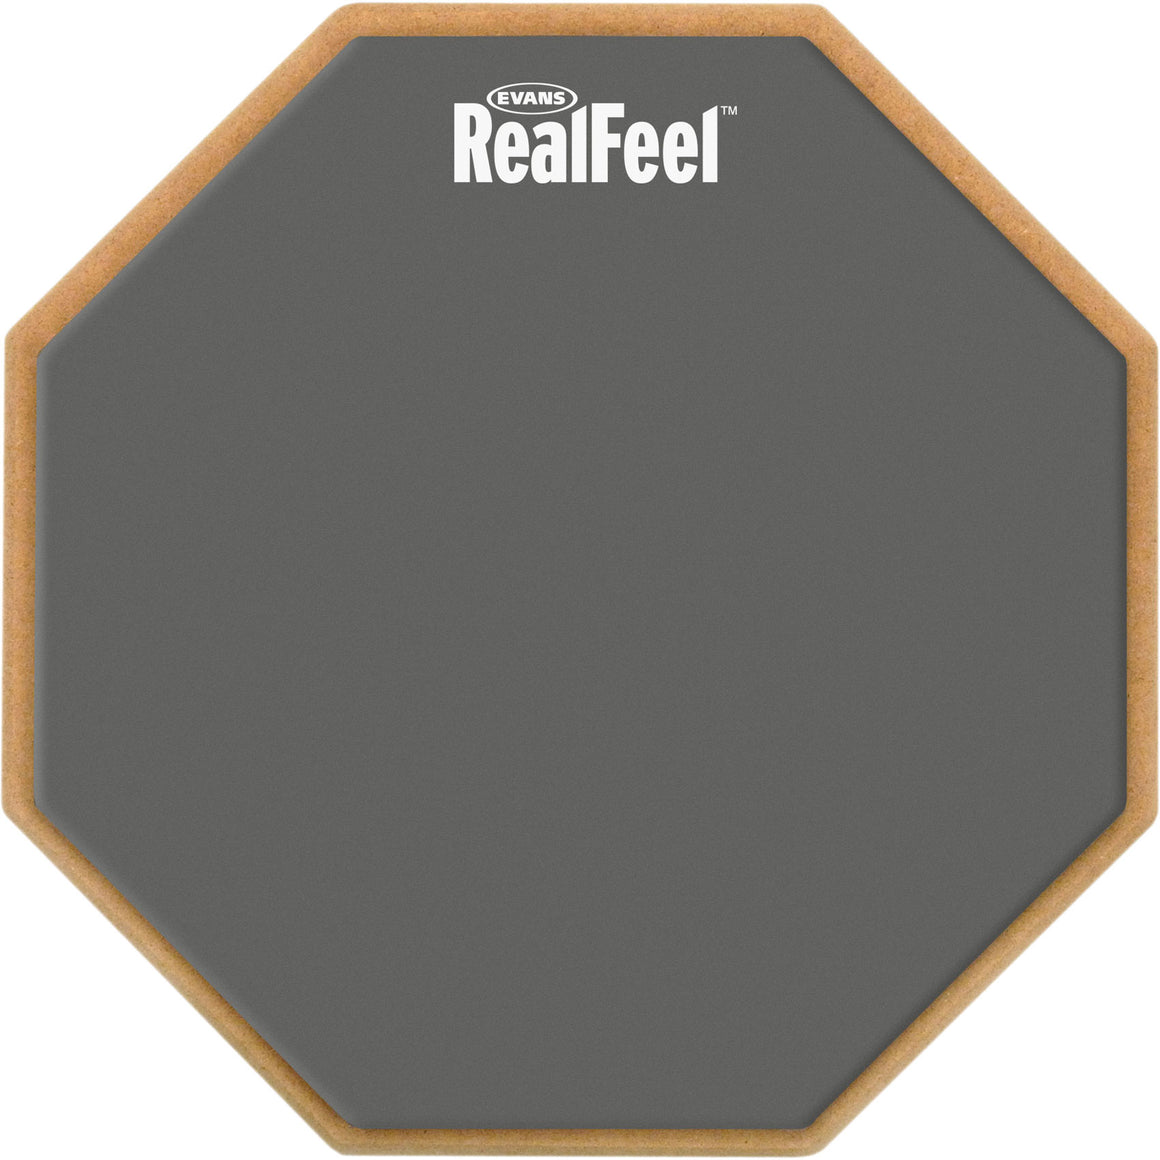 EVANS RF12D Real Feel 12" 2-Sided Practice Pad